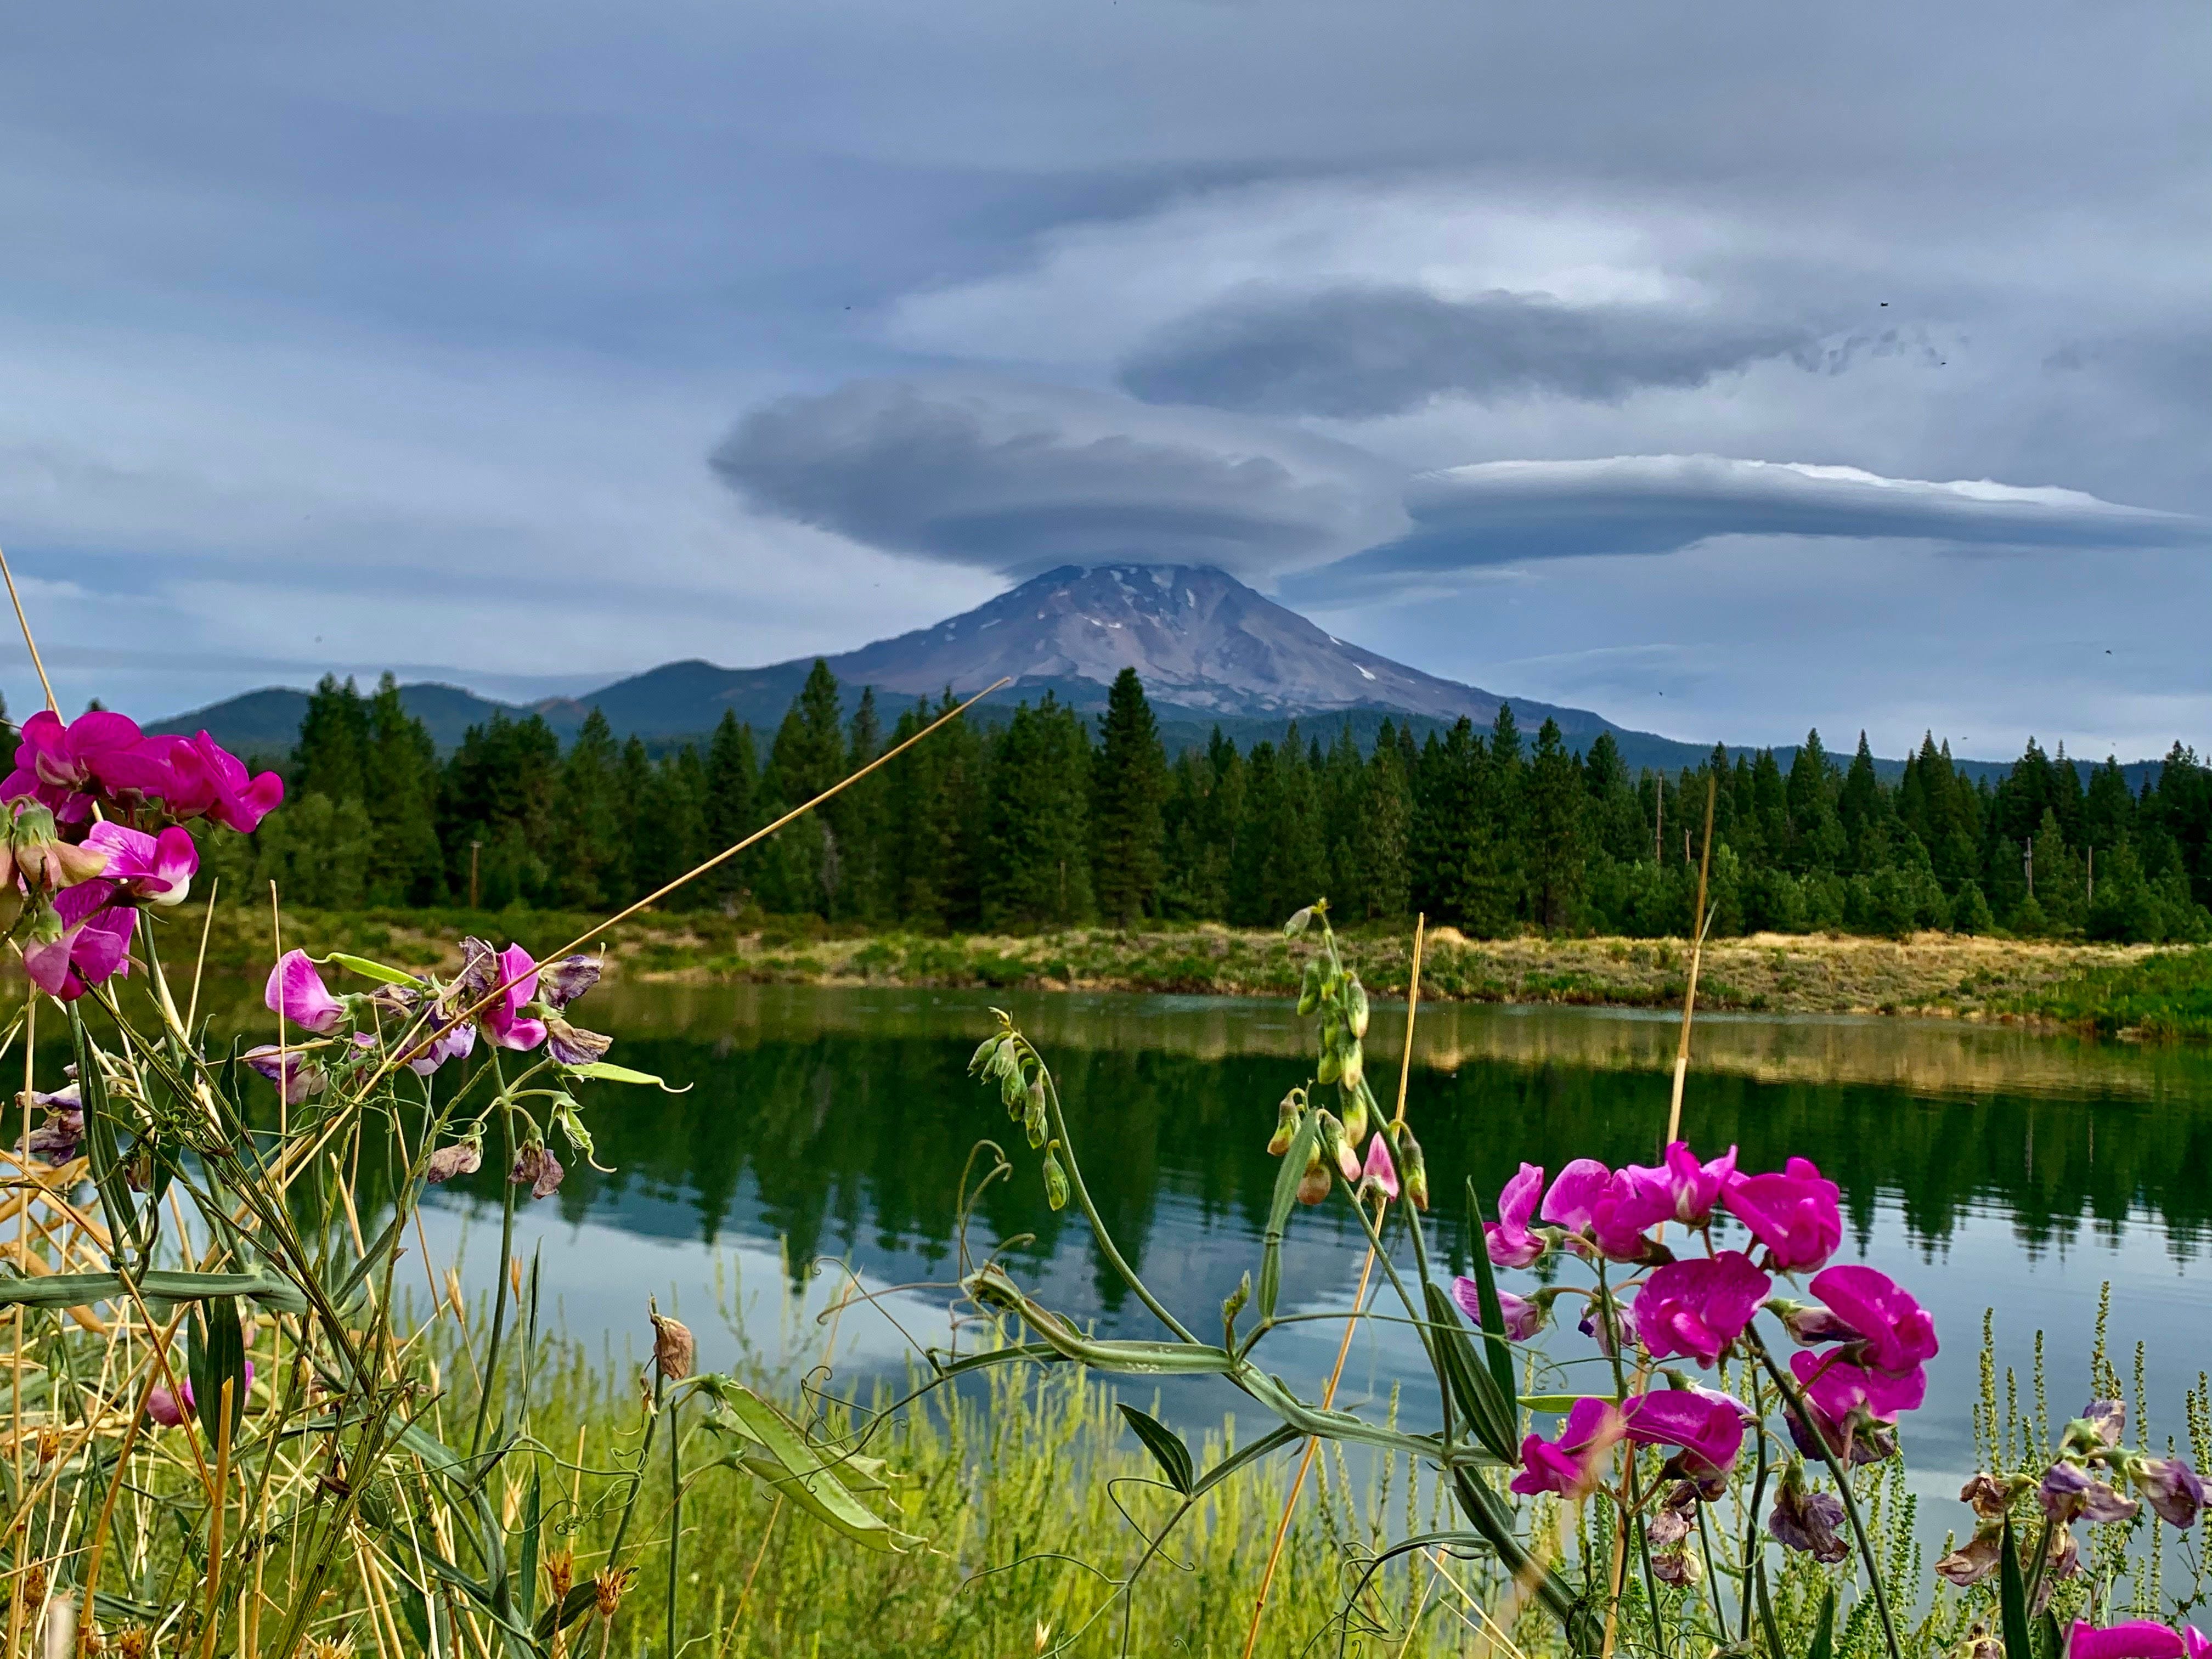 Mt. Shasta with sweet peas and lenticular clouds as seen from McCloud in August 2020.